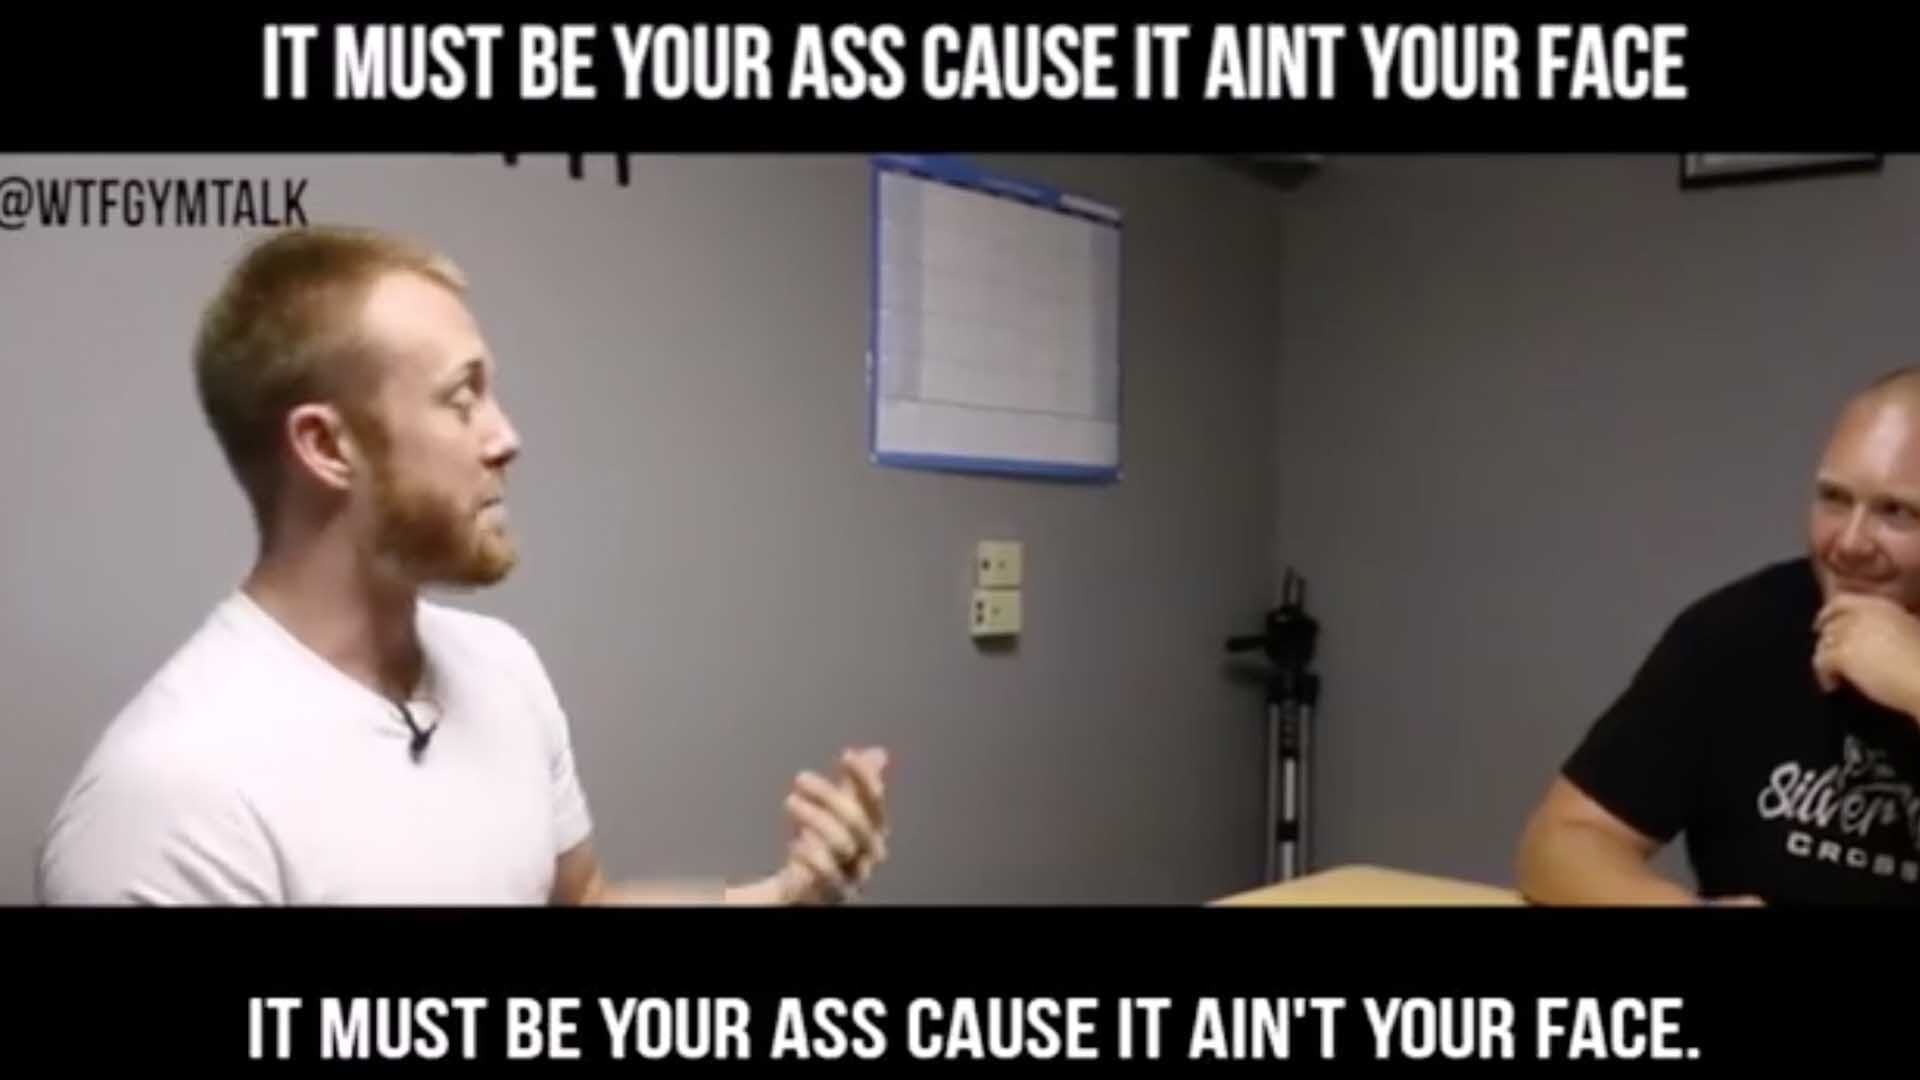 WTF Gym Talk | It Must Be Your Ass, Cause It Ain't Your Face